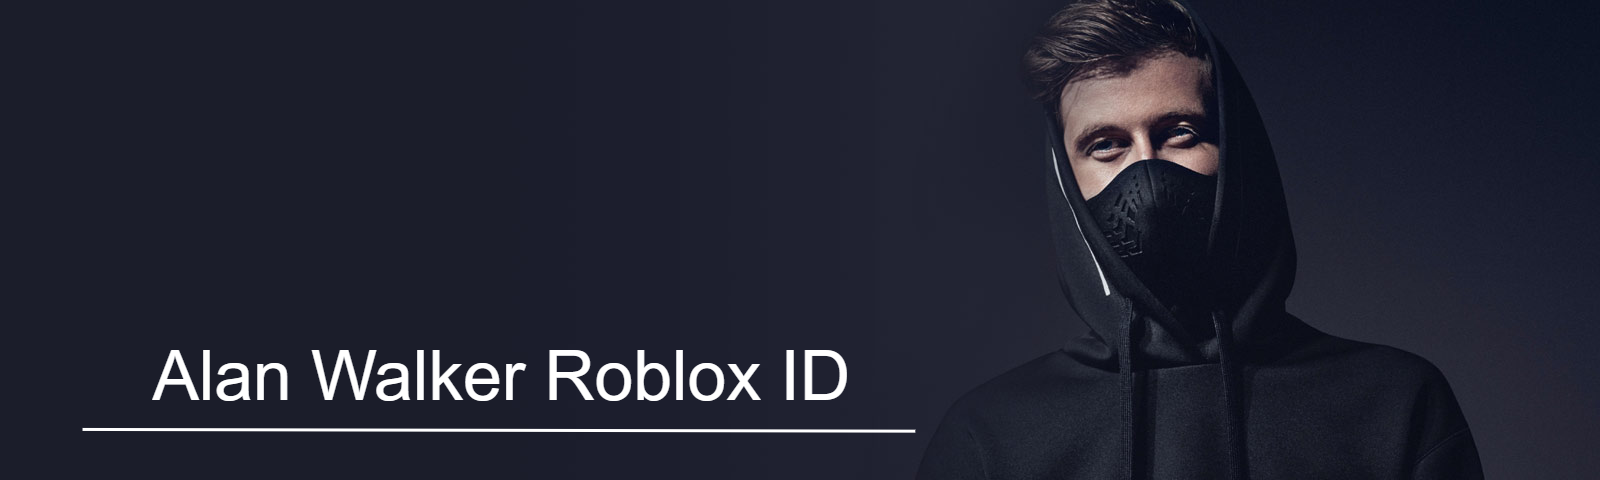 Top Stories About Roblox Songs Ids Written In 2019 Medium - 21 savage roblox full song